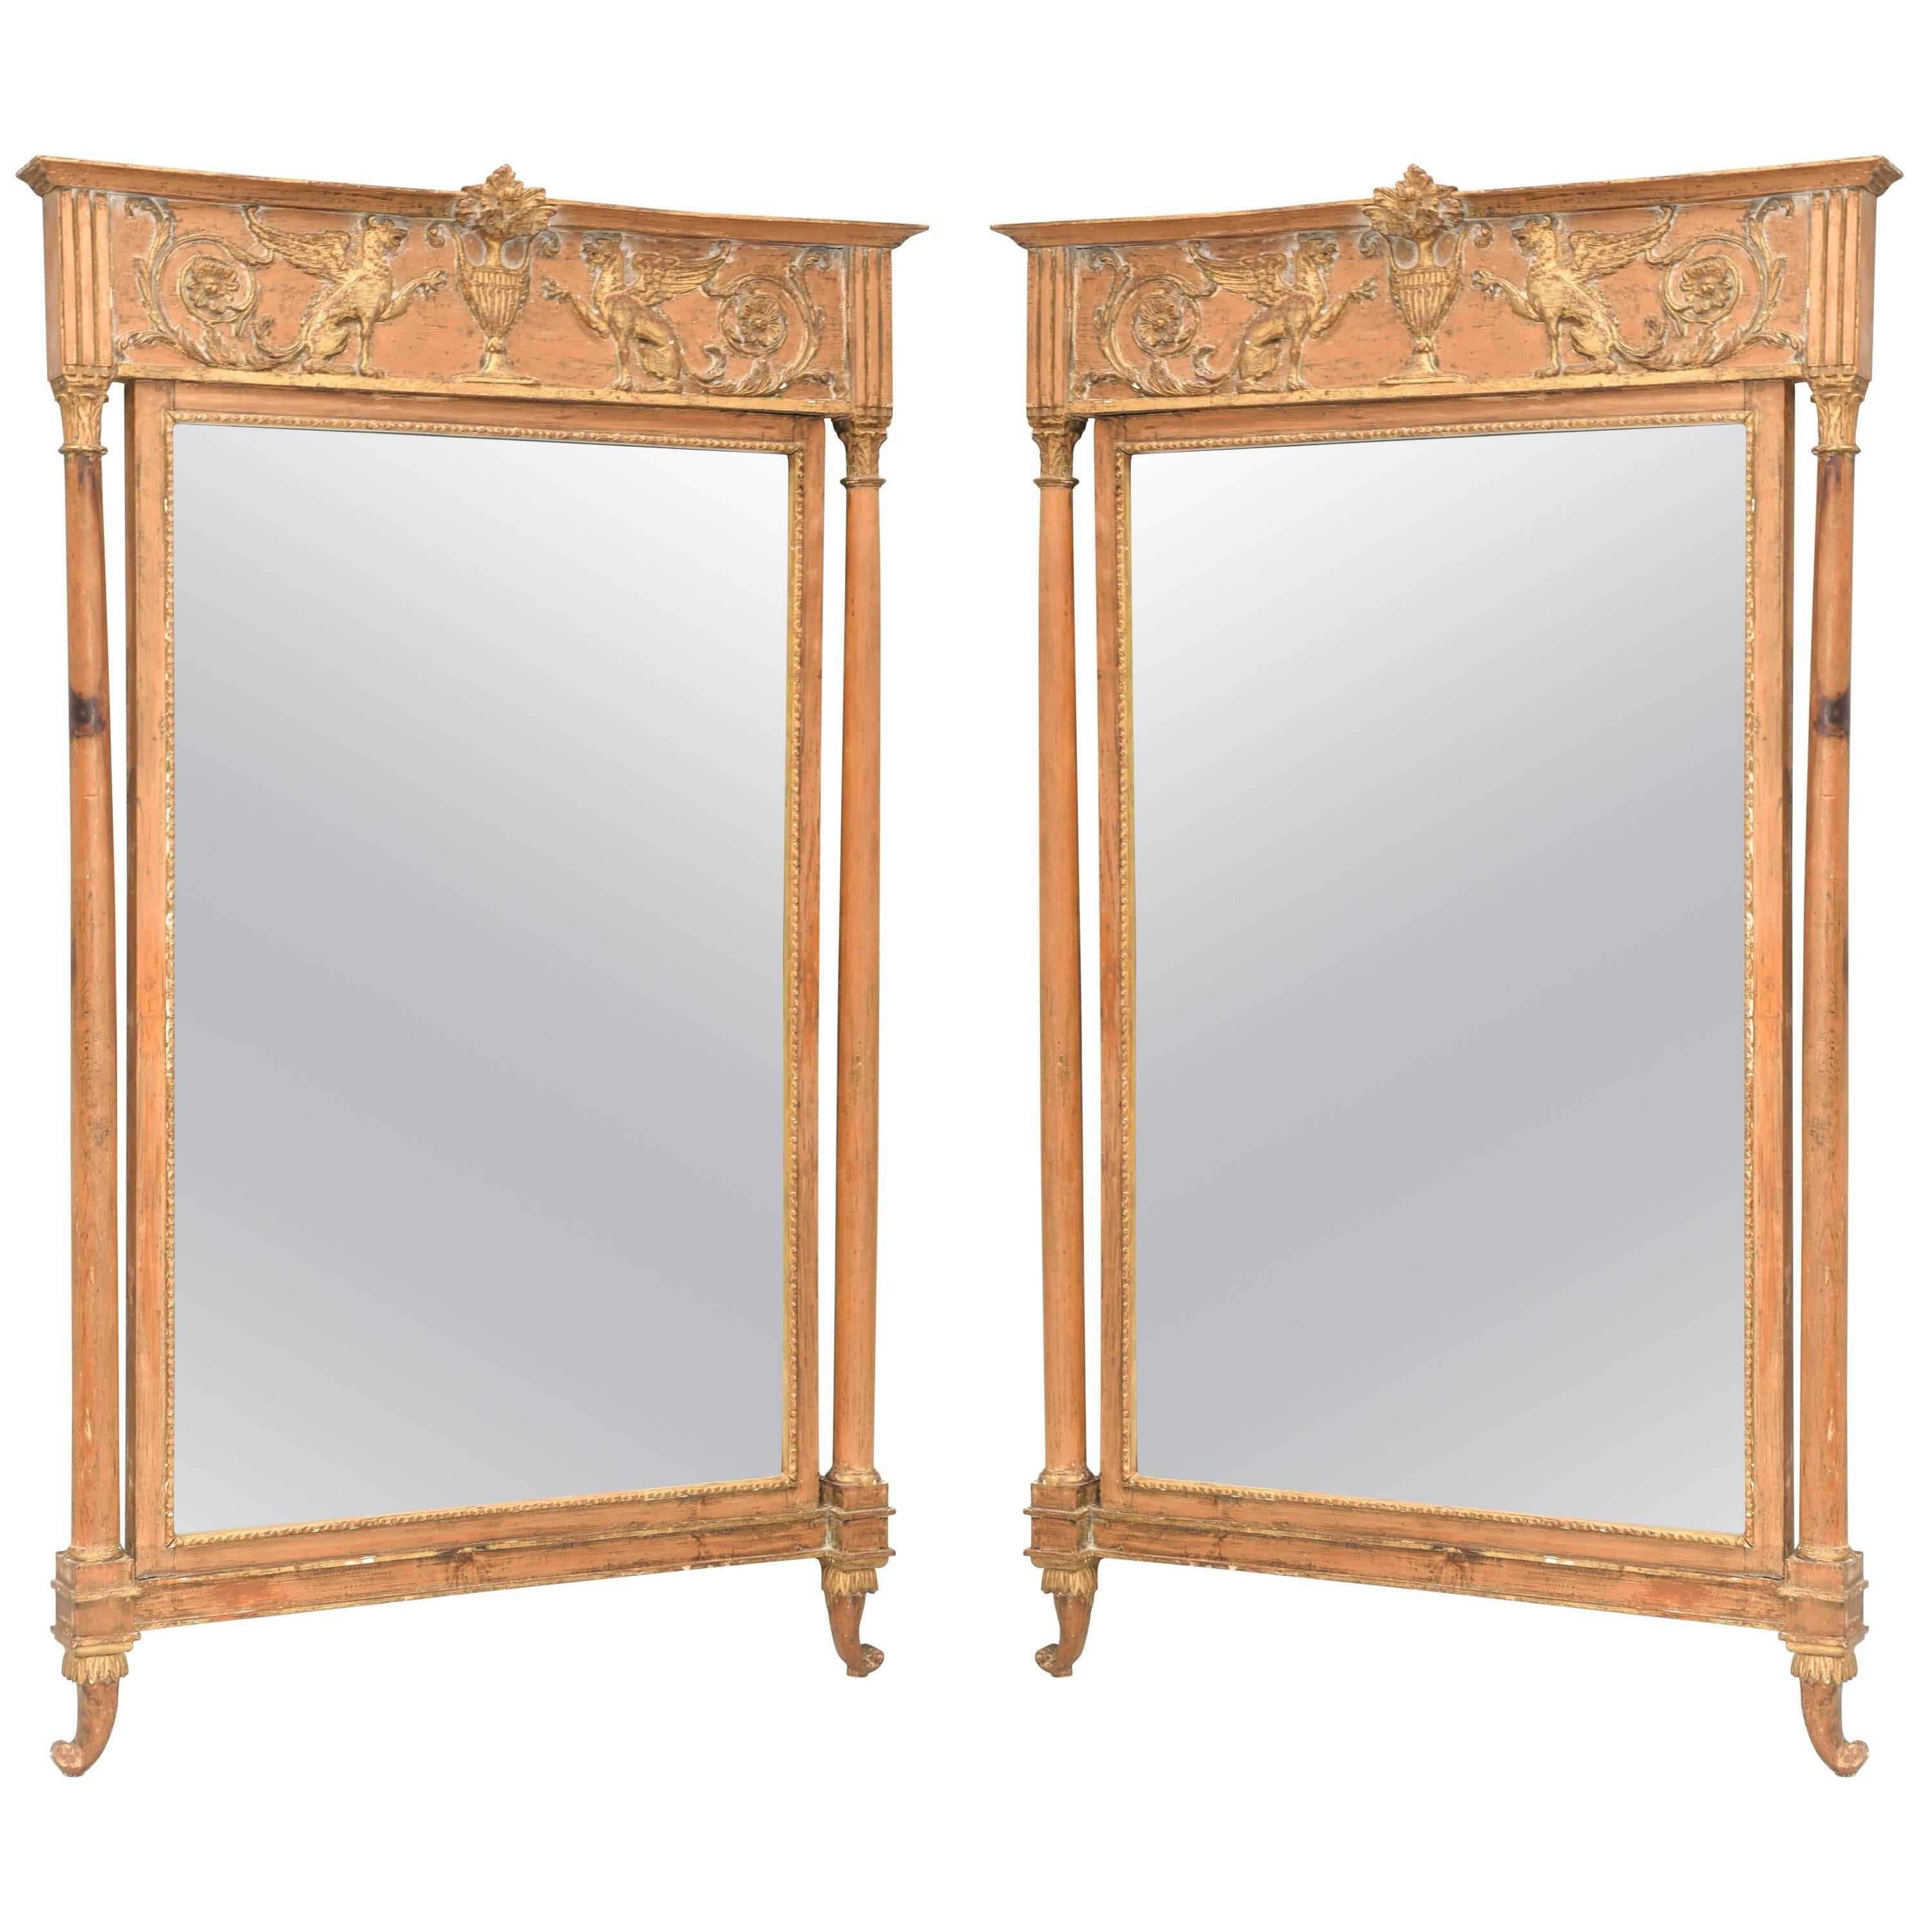 Pair of Empire-form, Parcel Gilt Mirrors